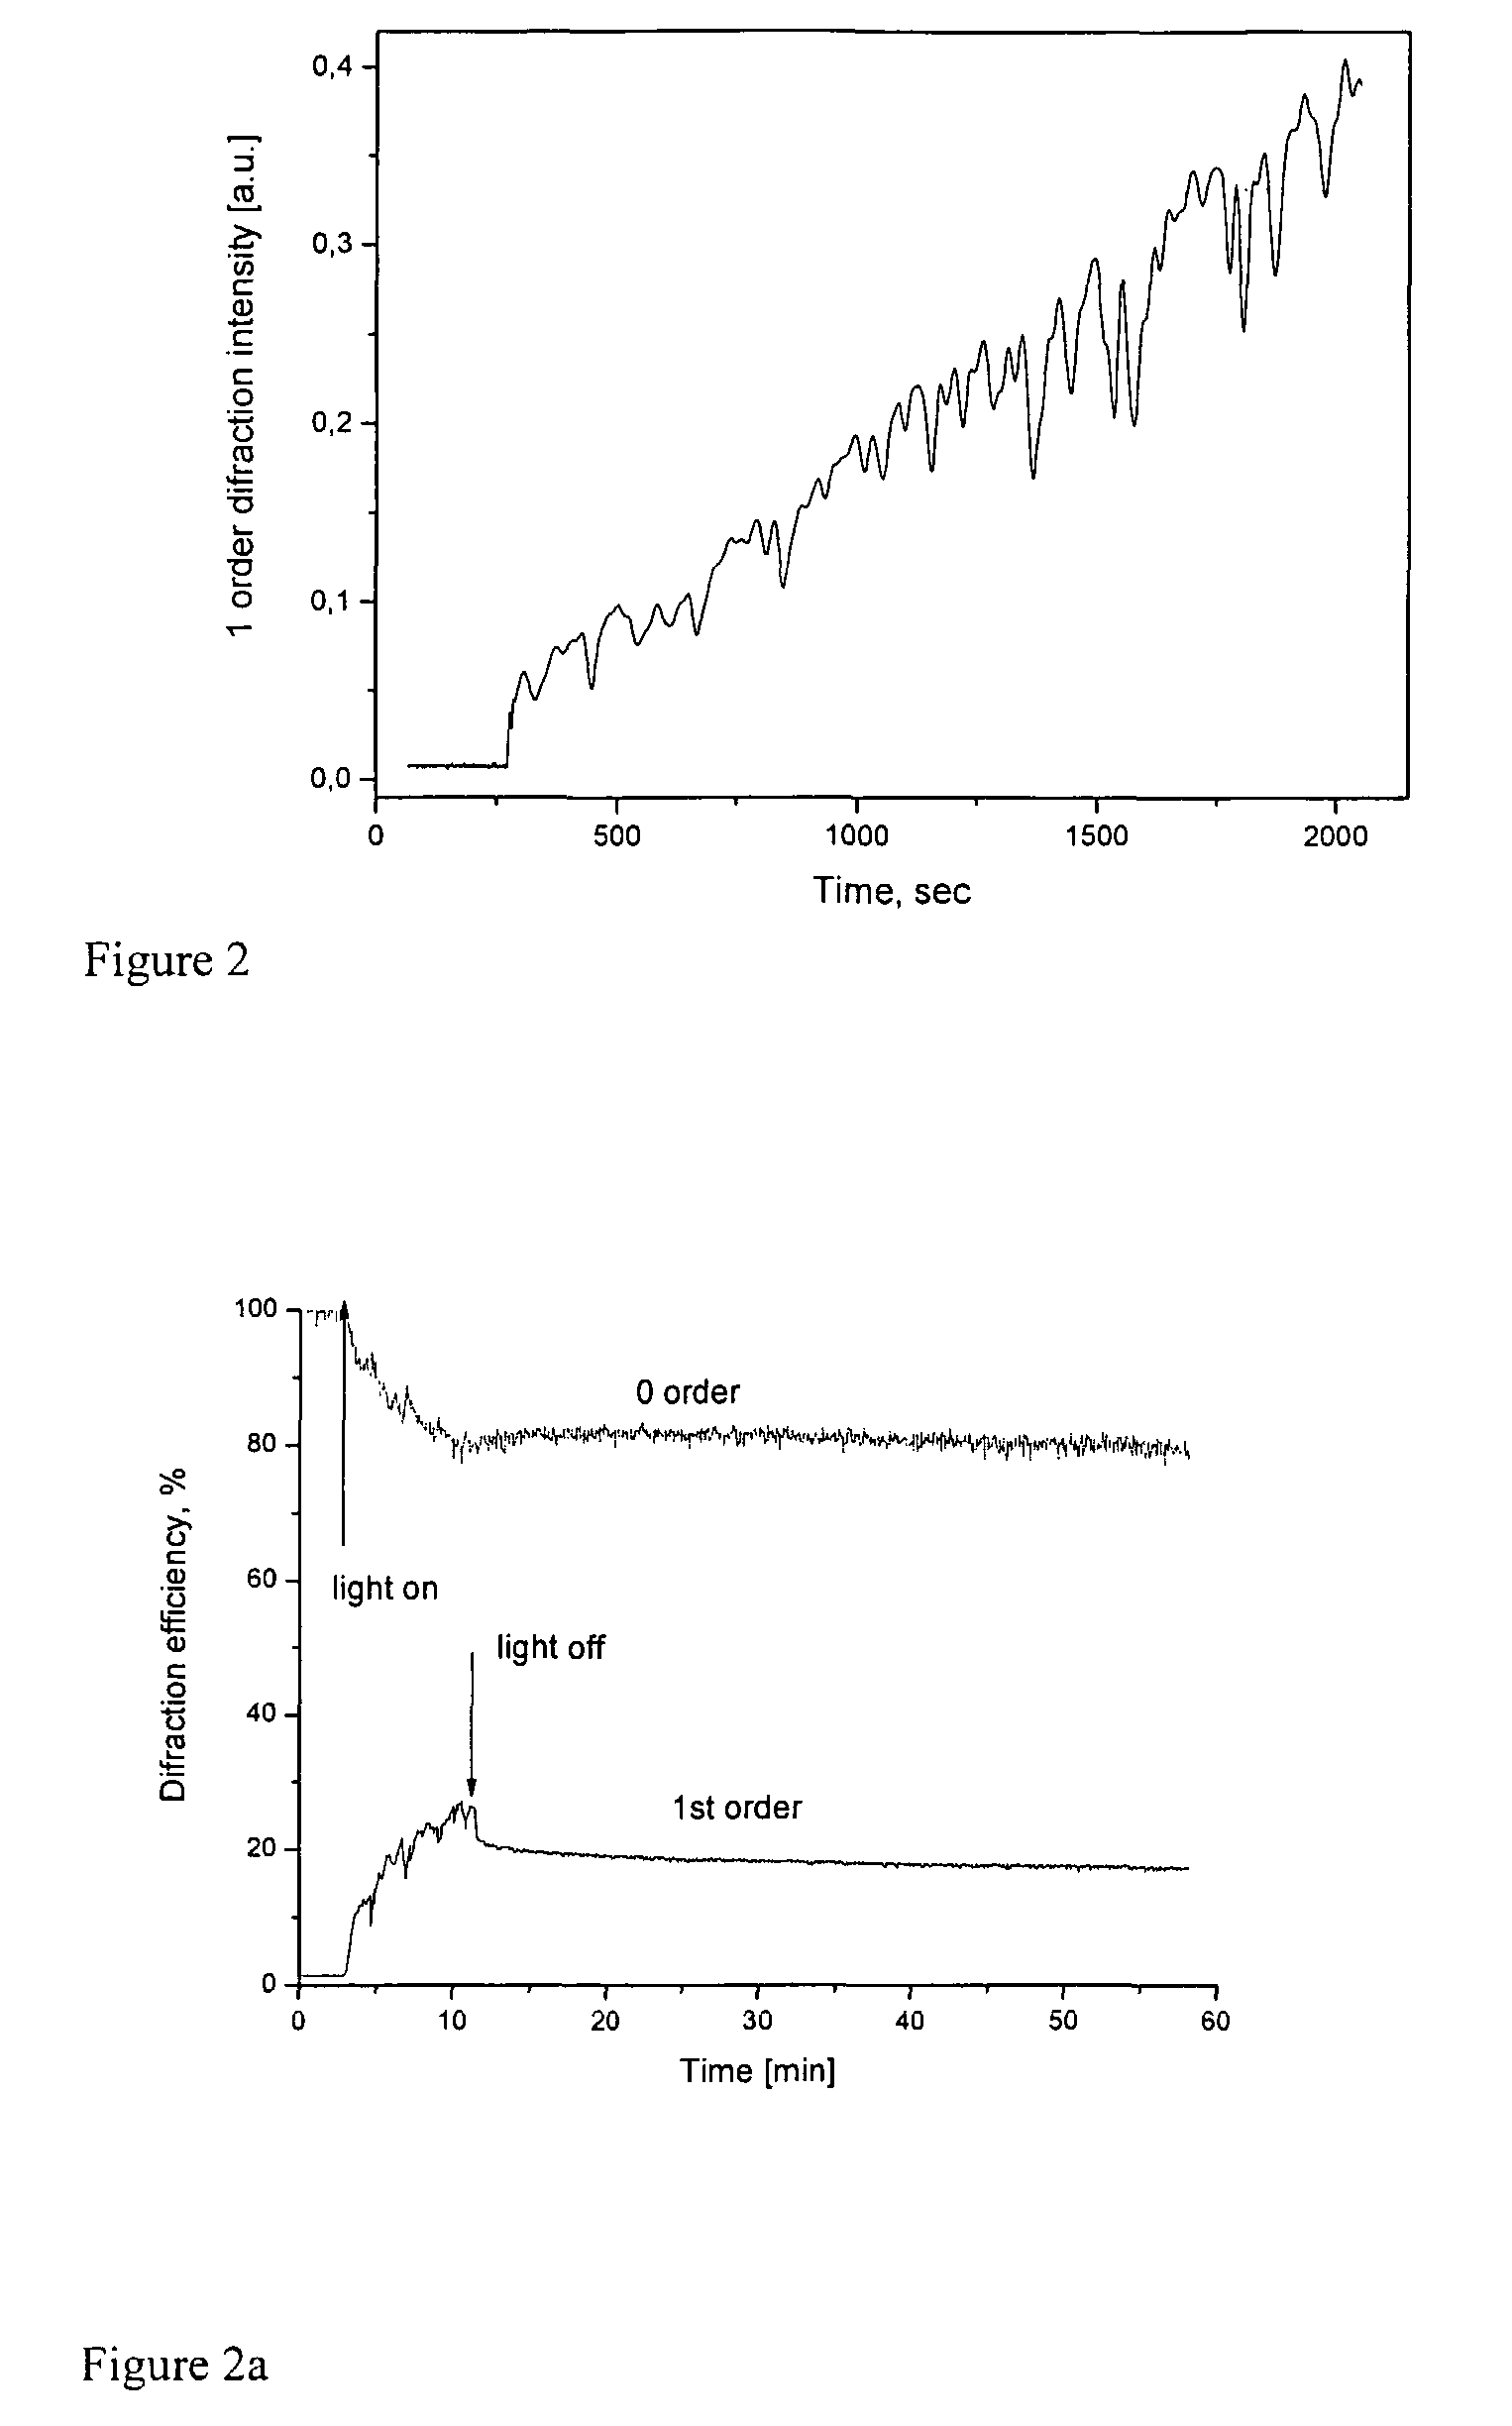 Film forming material and preparation of surface relief and optically anisotropic structures by irradiating a film of the said material